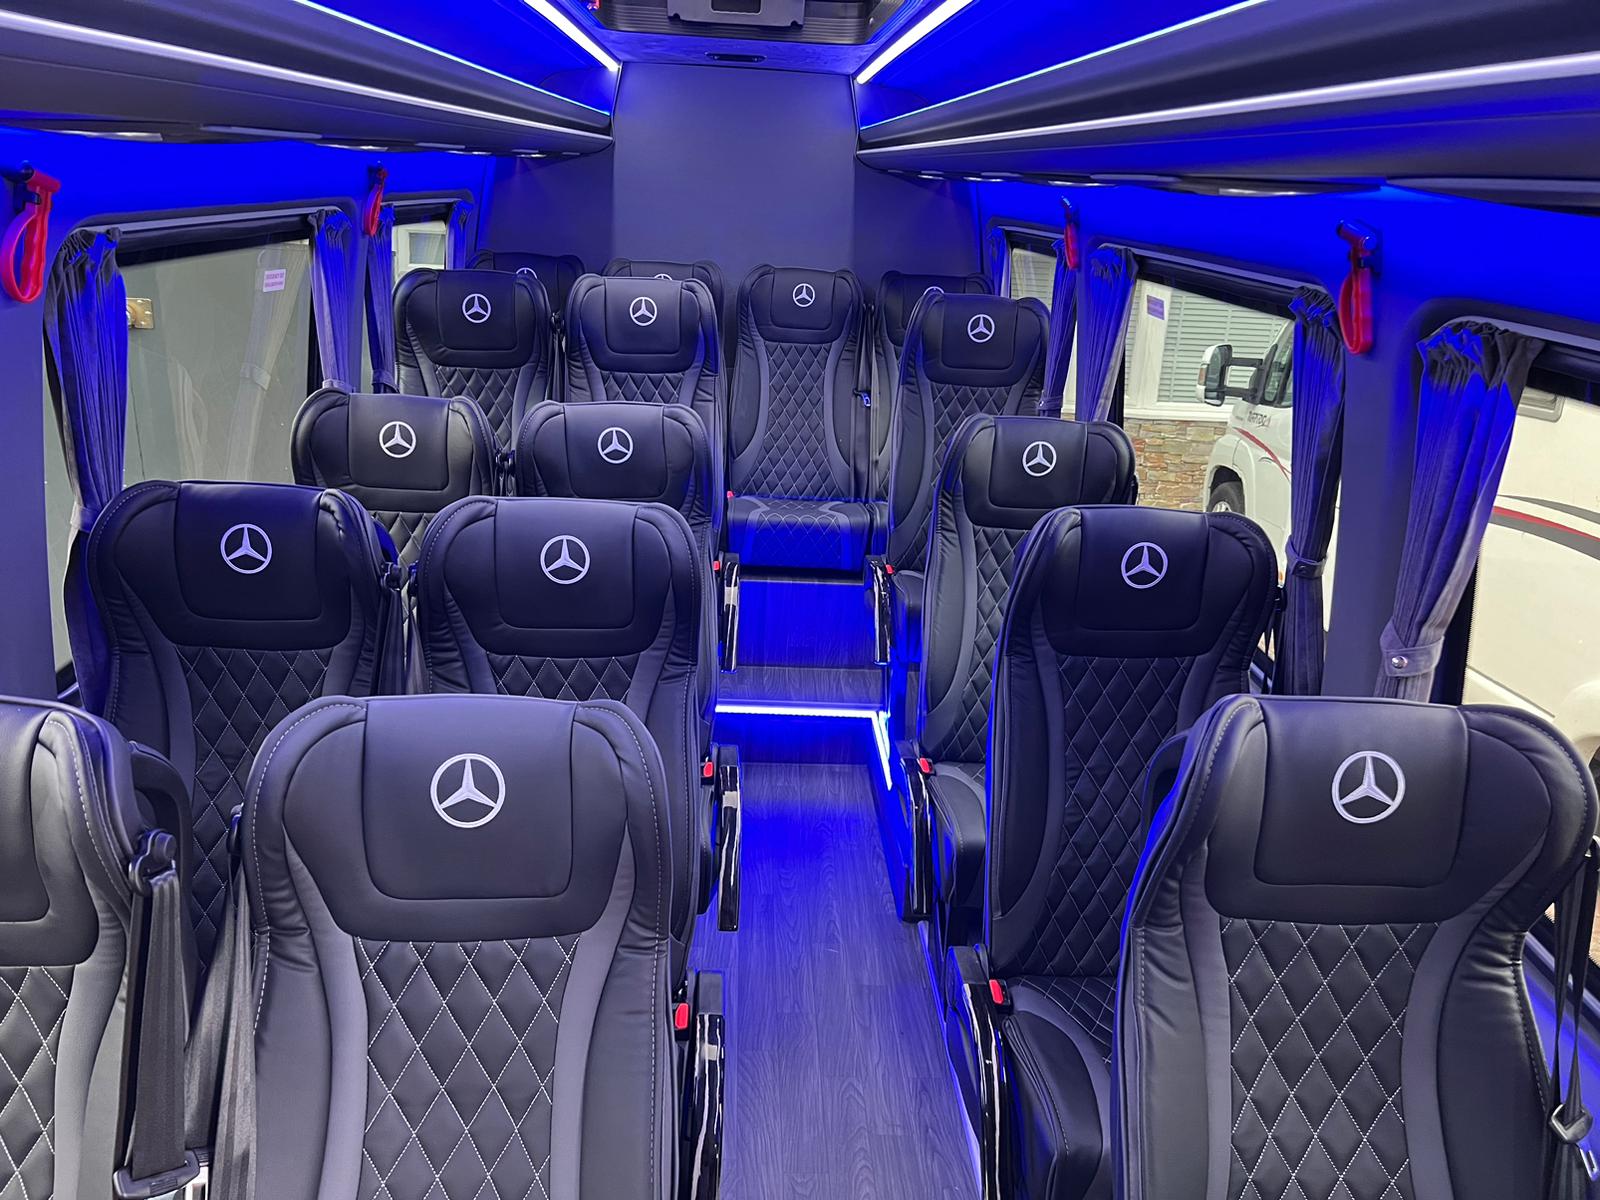 Choosing the Best 16 Seater Minibus Hire for Your Group in London